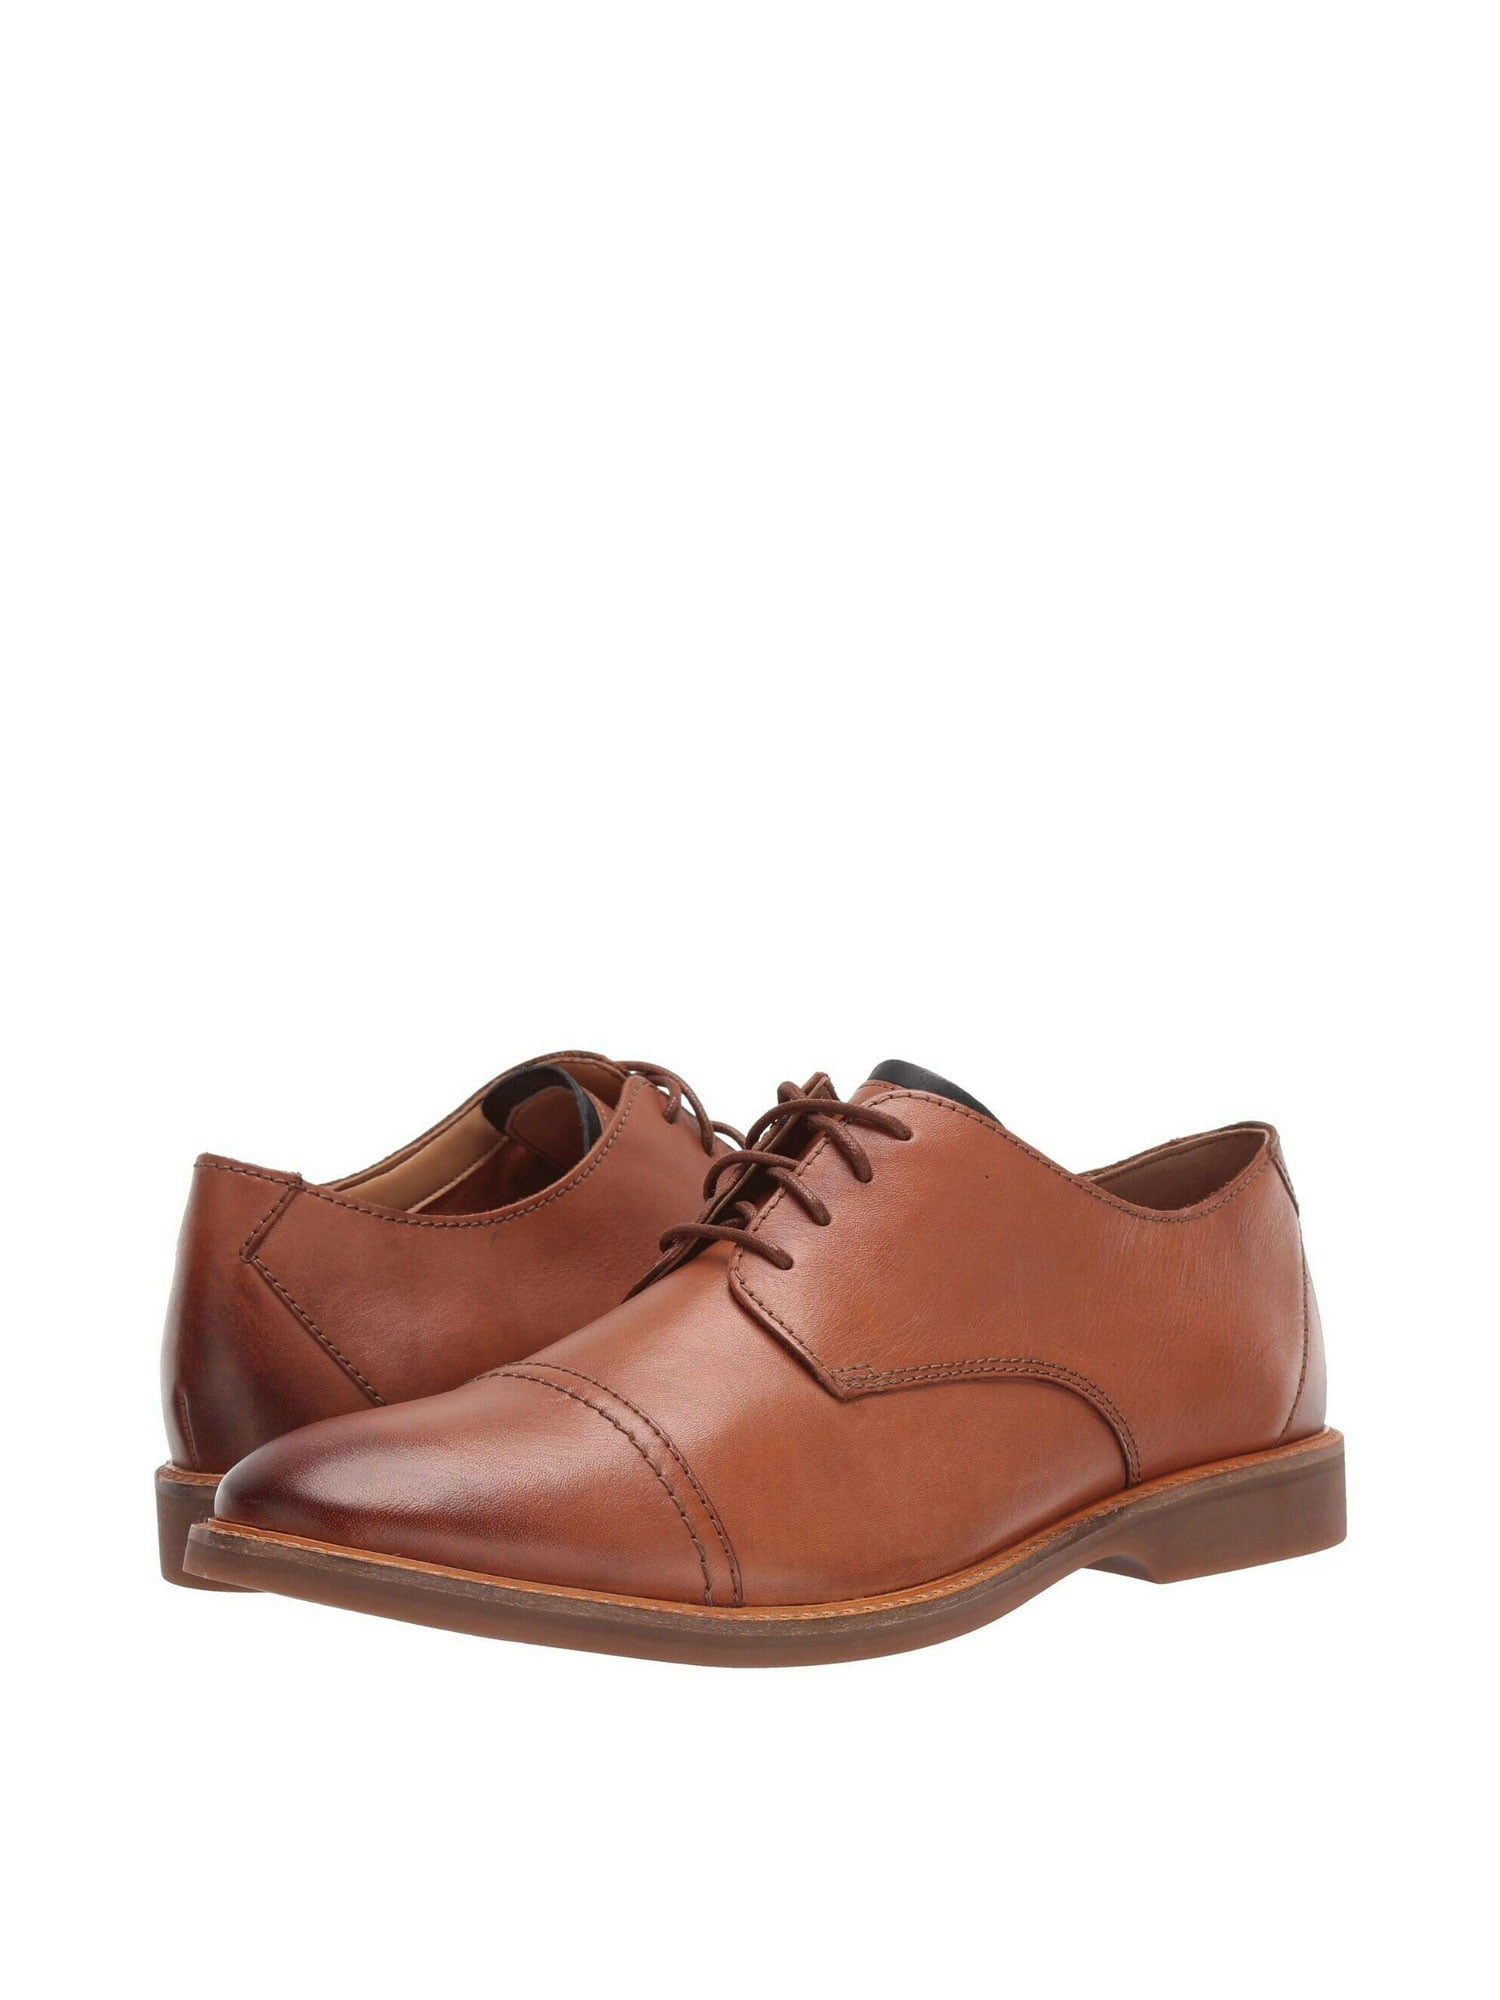 clarks lace up oxfords